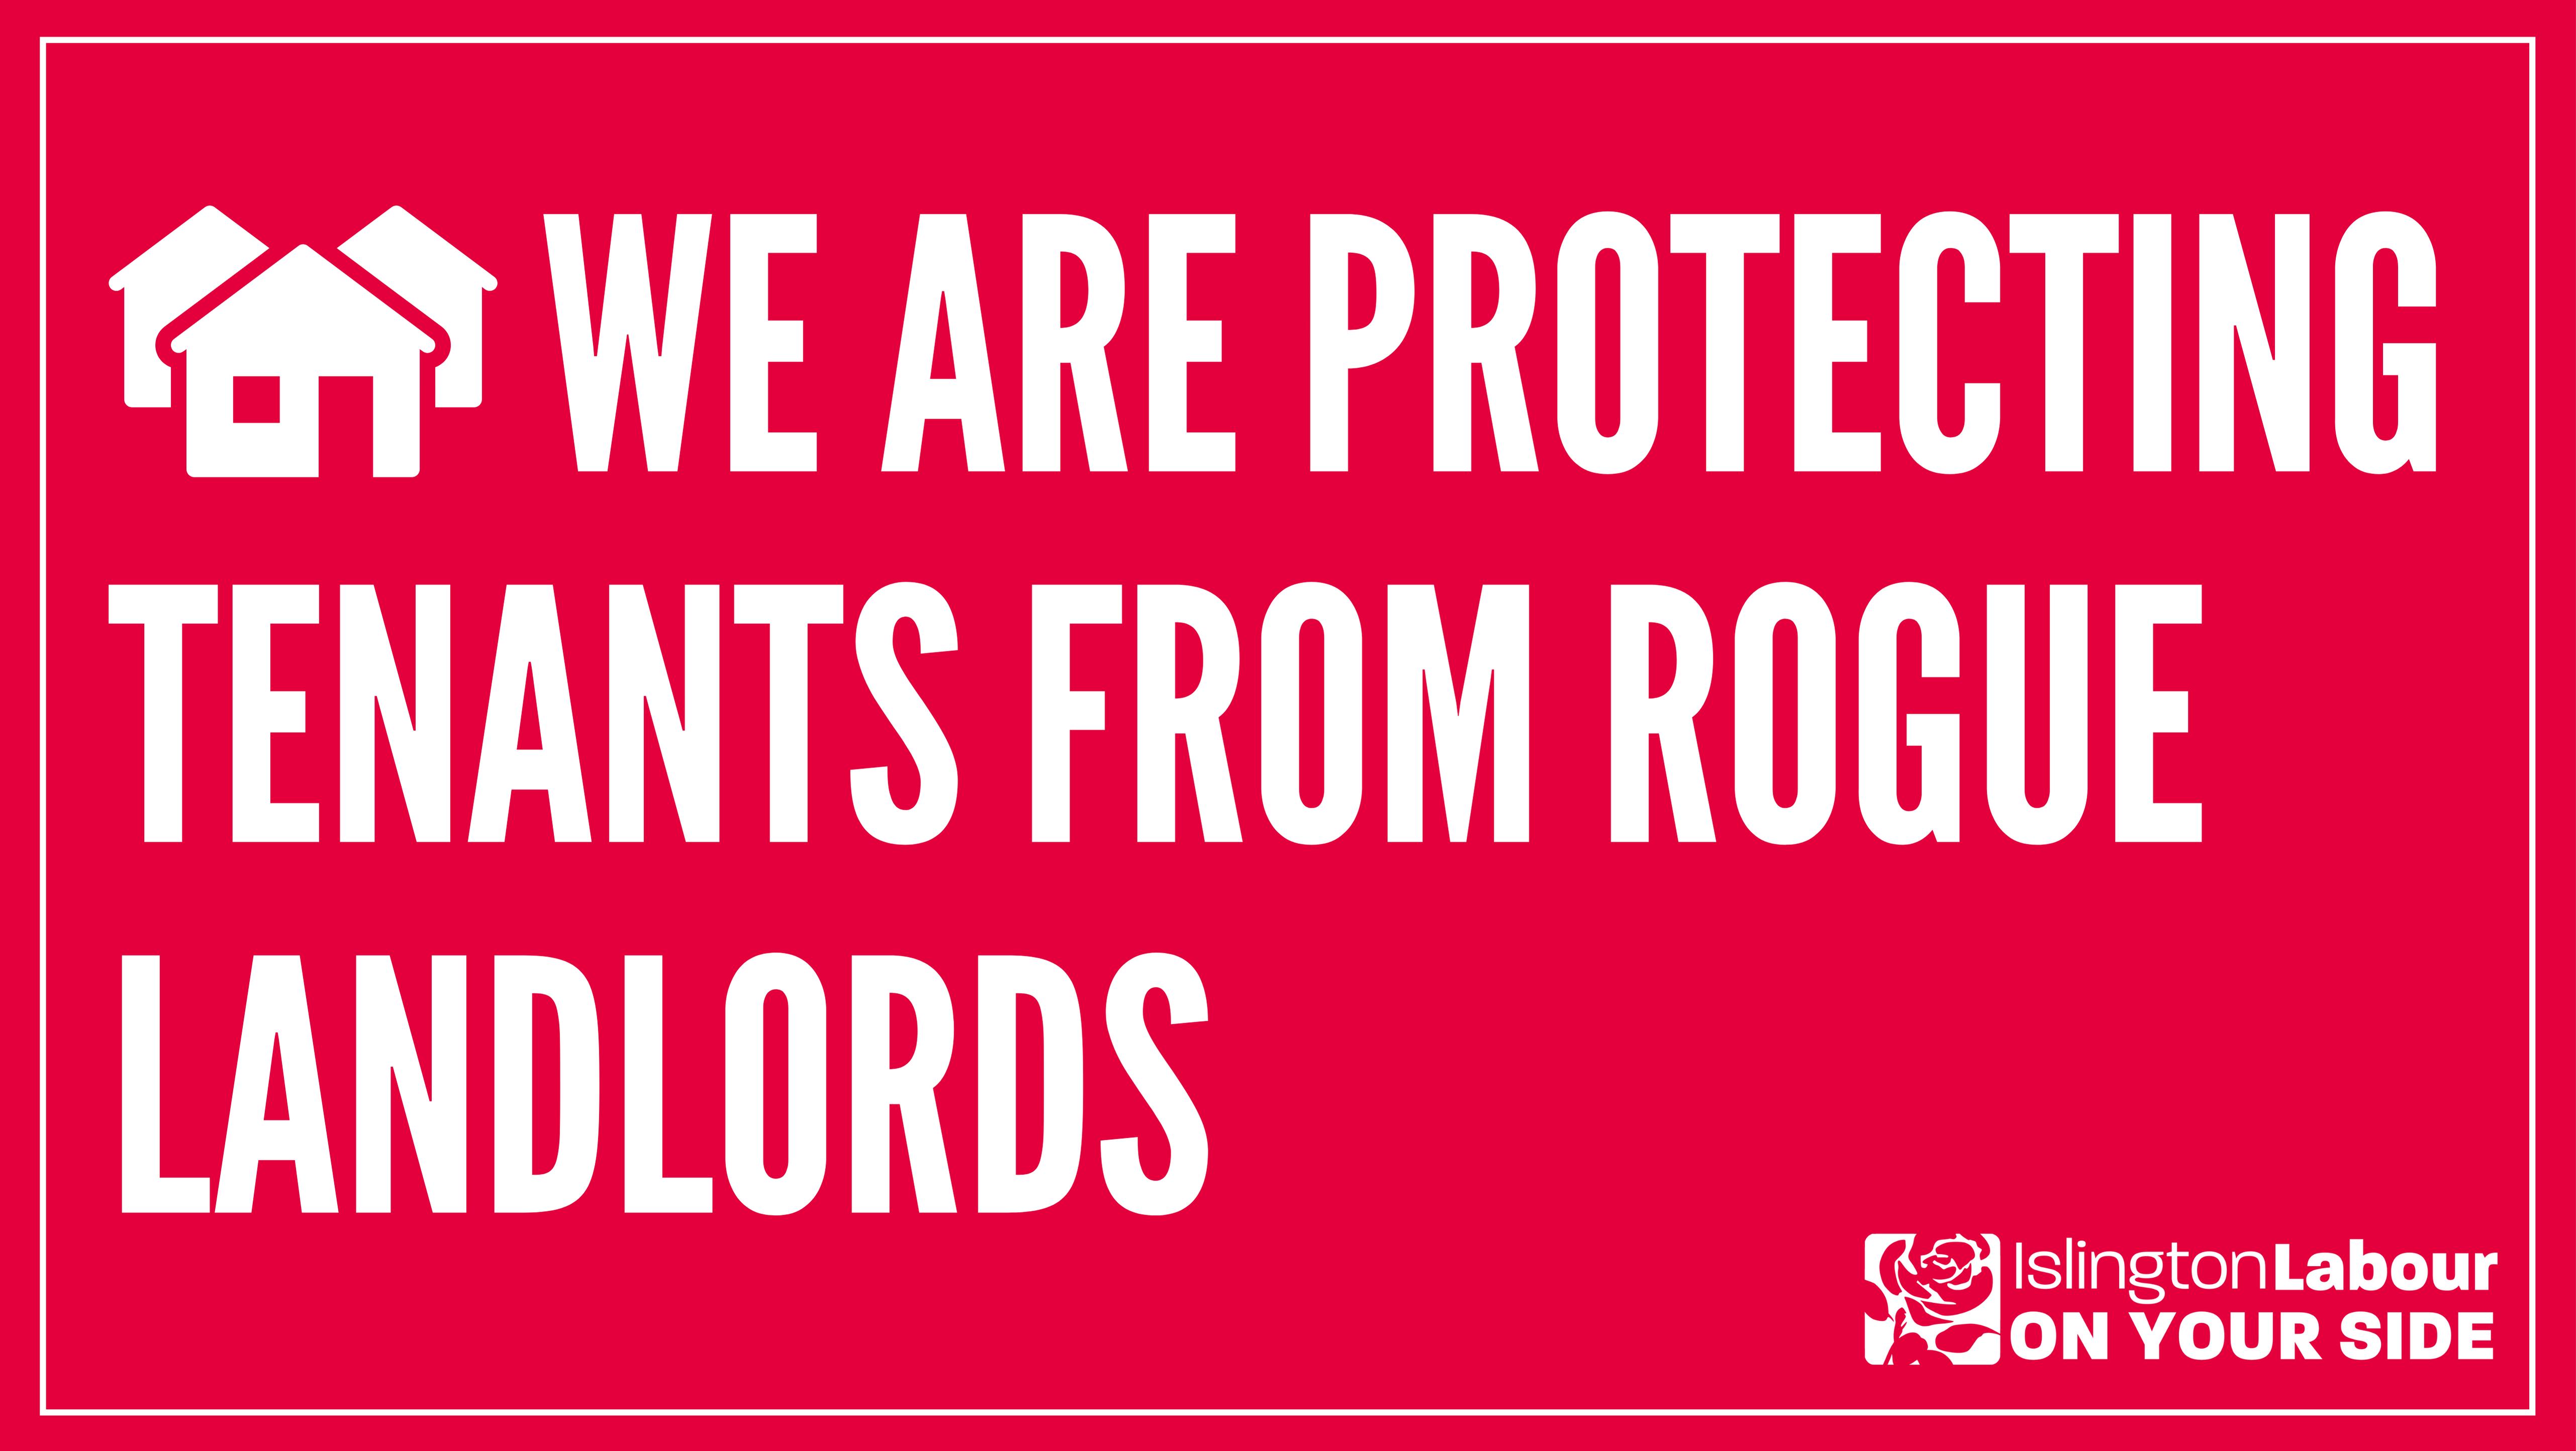 We are protecting tenants from rogue landlords